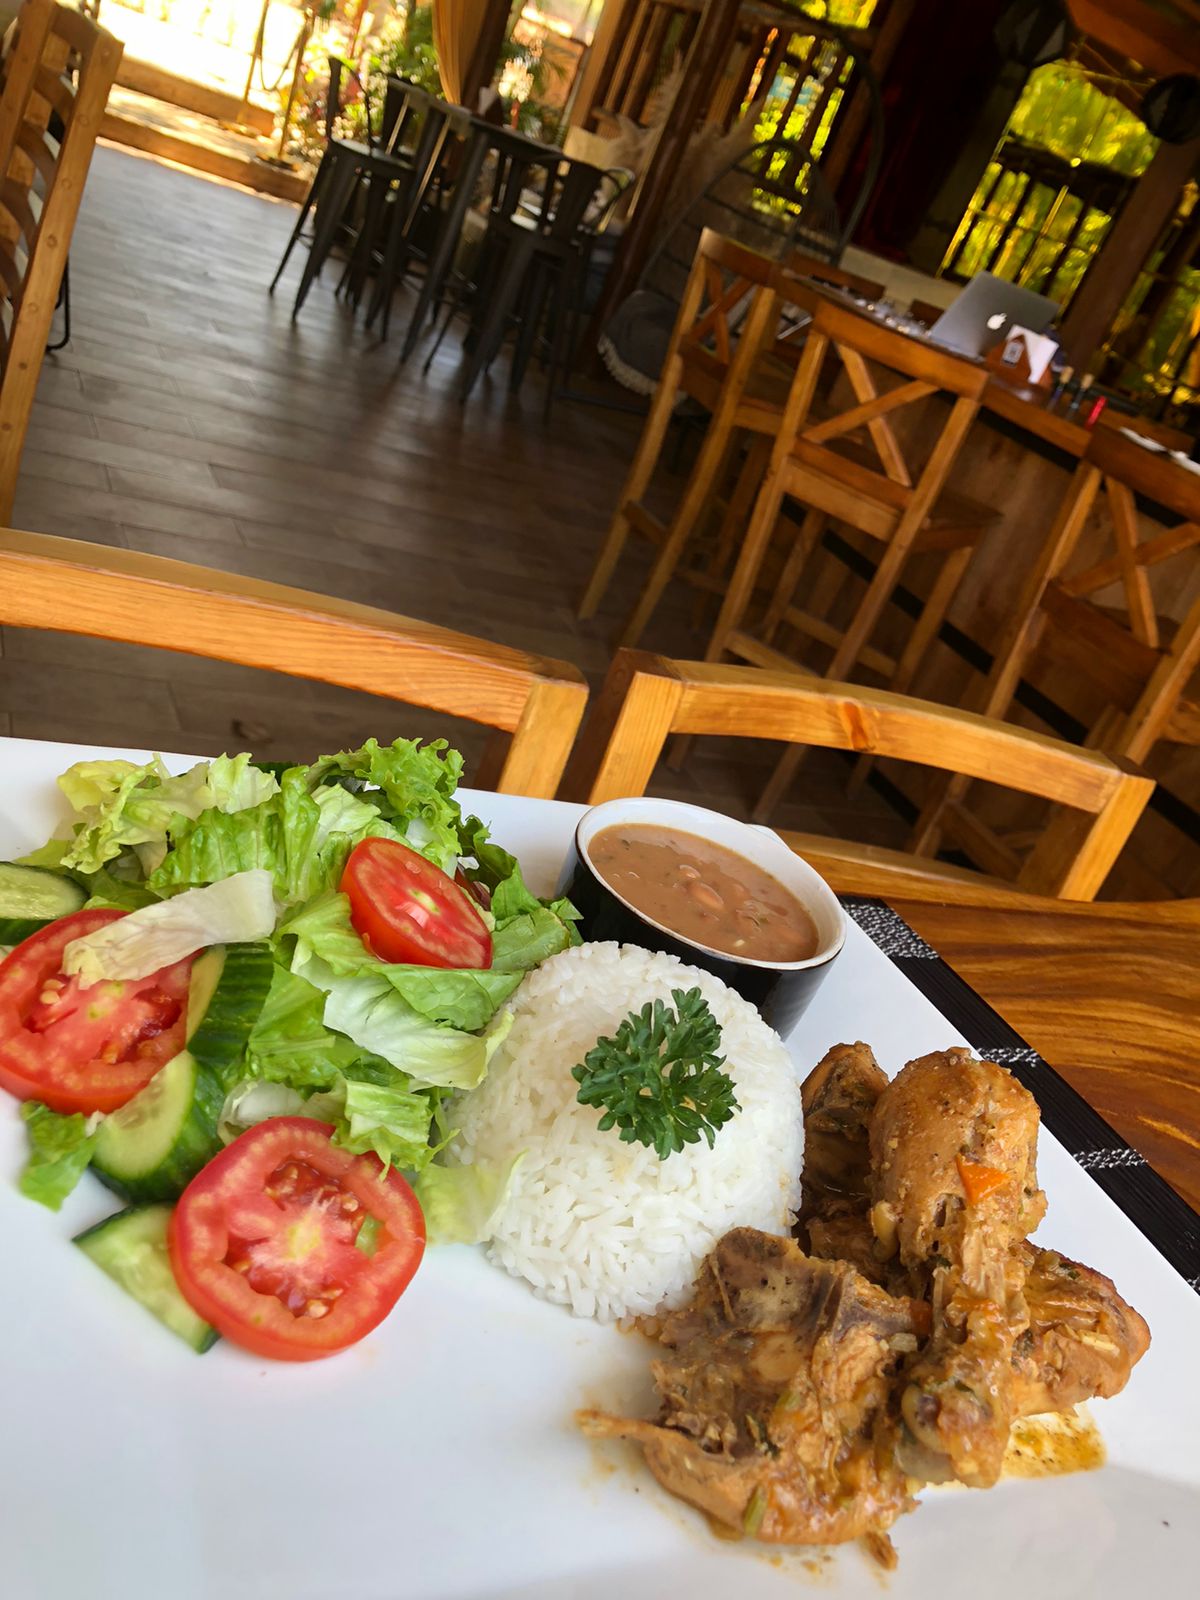 Chicken Monday! Daily Dominican Feature.